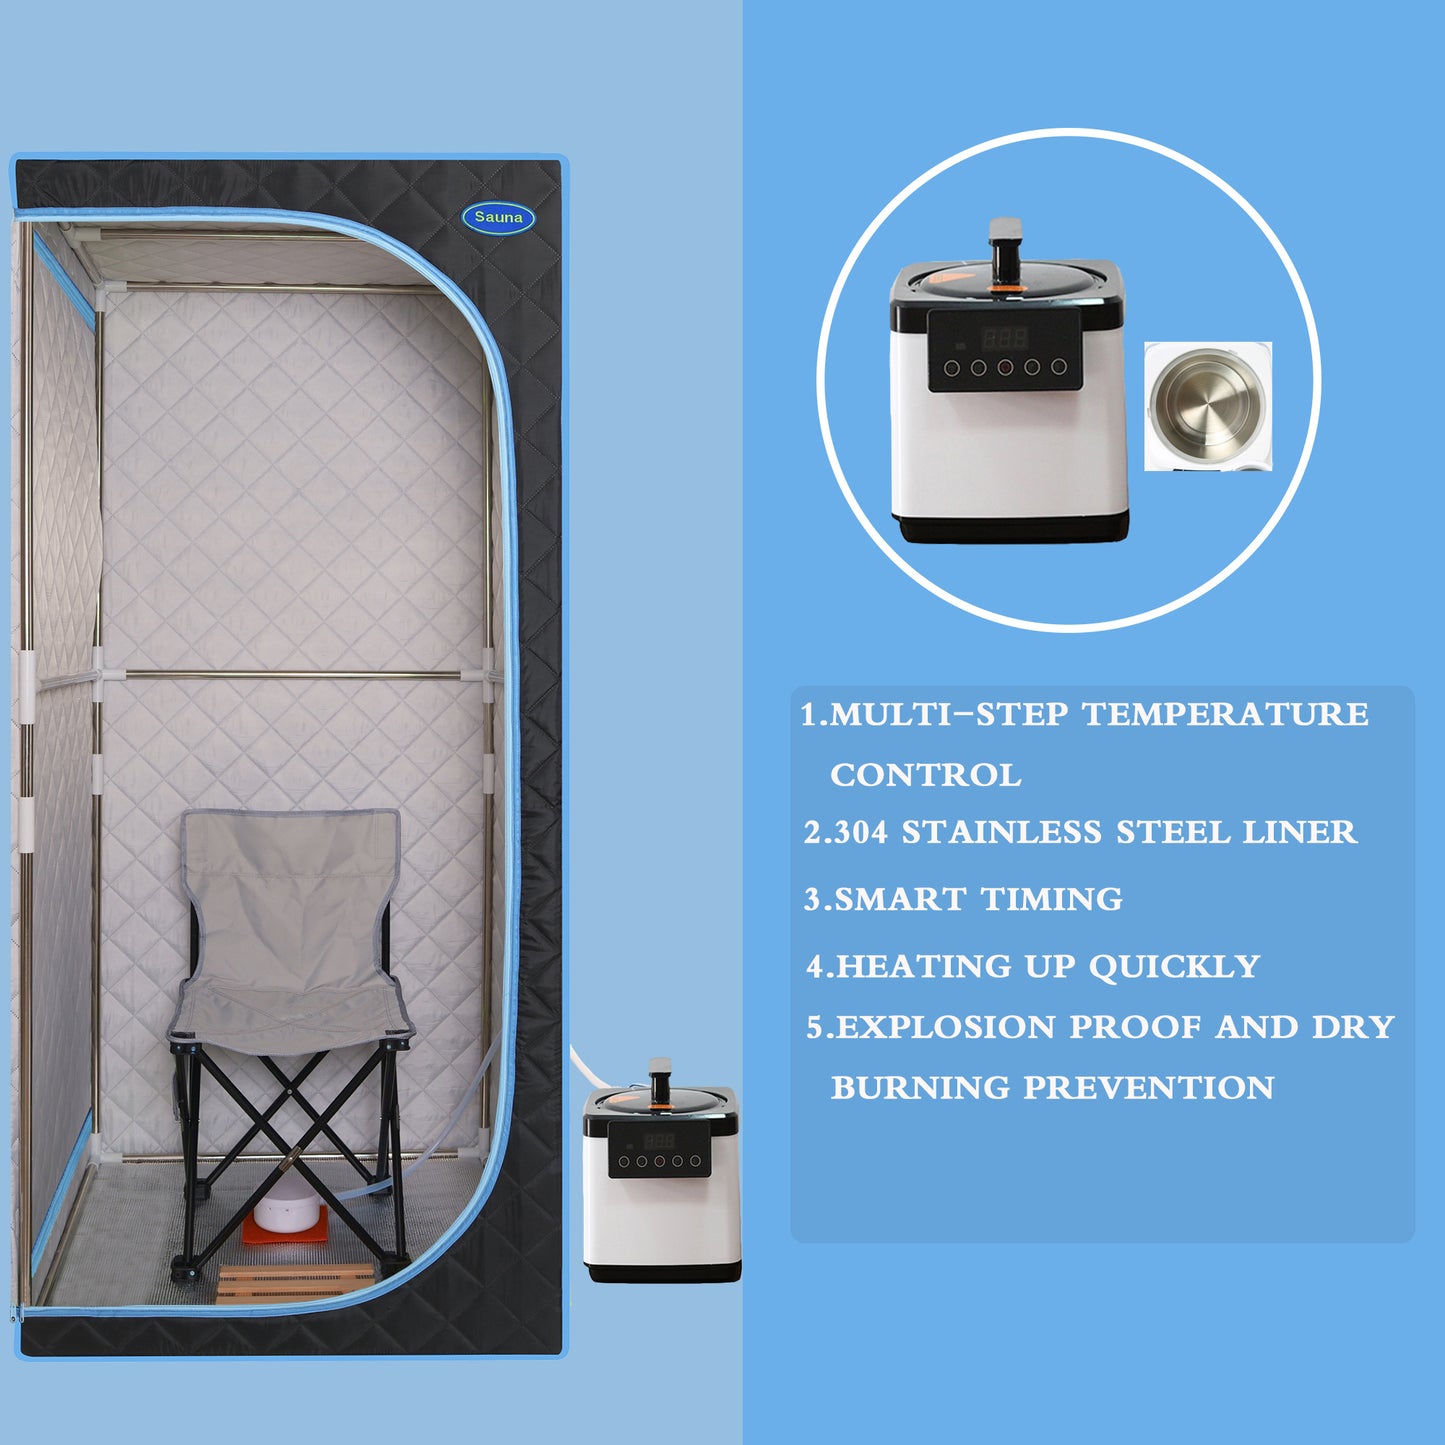 Portable Plus Type Full Size Steam Sauna tent. Spa, Detox, Therapy and Relaxation at home.Larger Space, Stainless Steel Pipes Connector Easy to Install, with FCC Certification--Black (Blue binding)